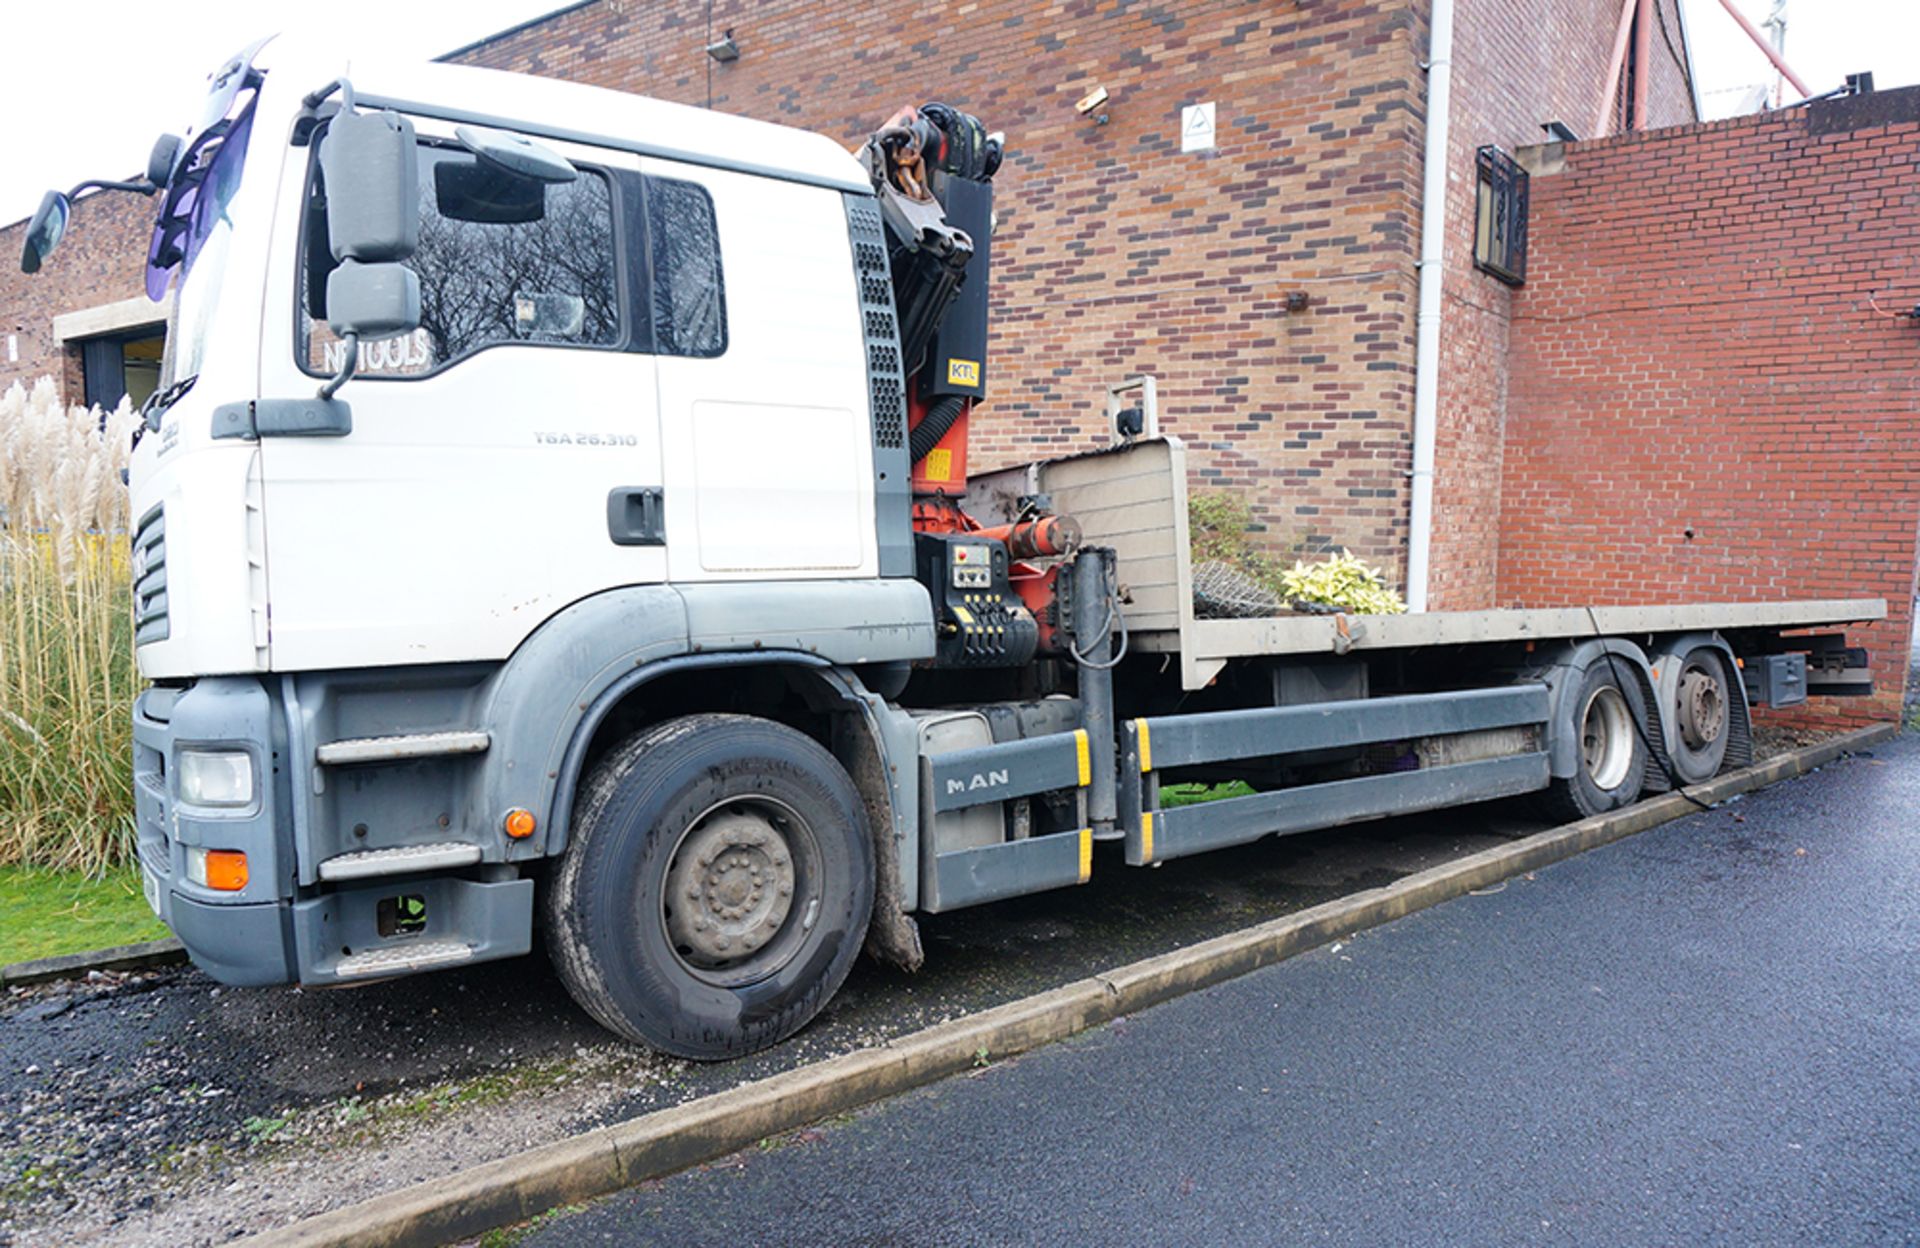 MAN TGA 26.310 Flatbed Lorry with Palfinger PK23002 Crane. 26,000KG Gross Weight. Year 2006. - Image 3 of 20